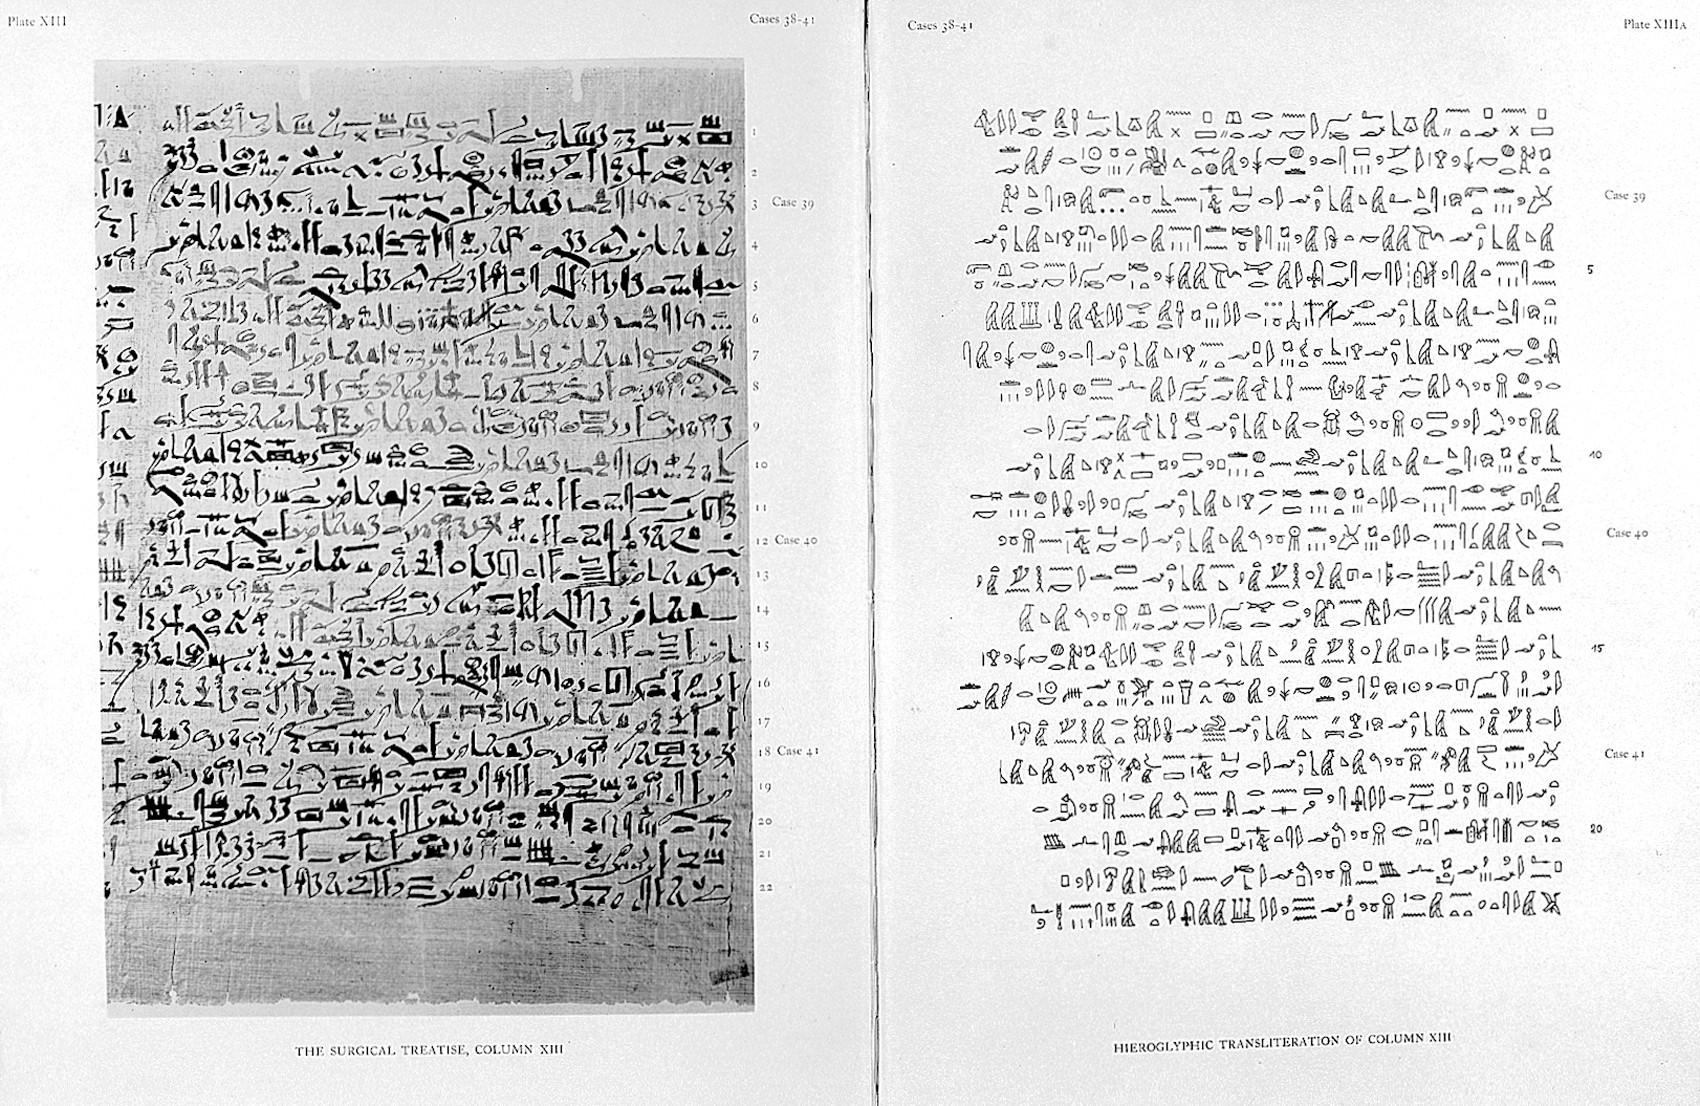 A page from the Edwin Smith Papyrus with Hieroglyphic transliterations on the right